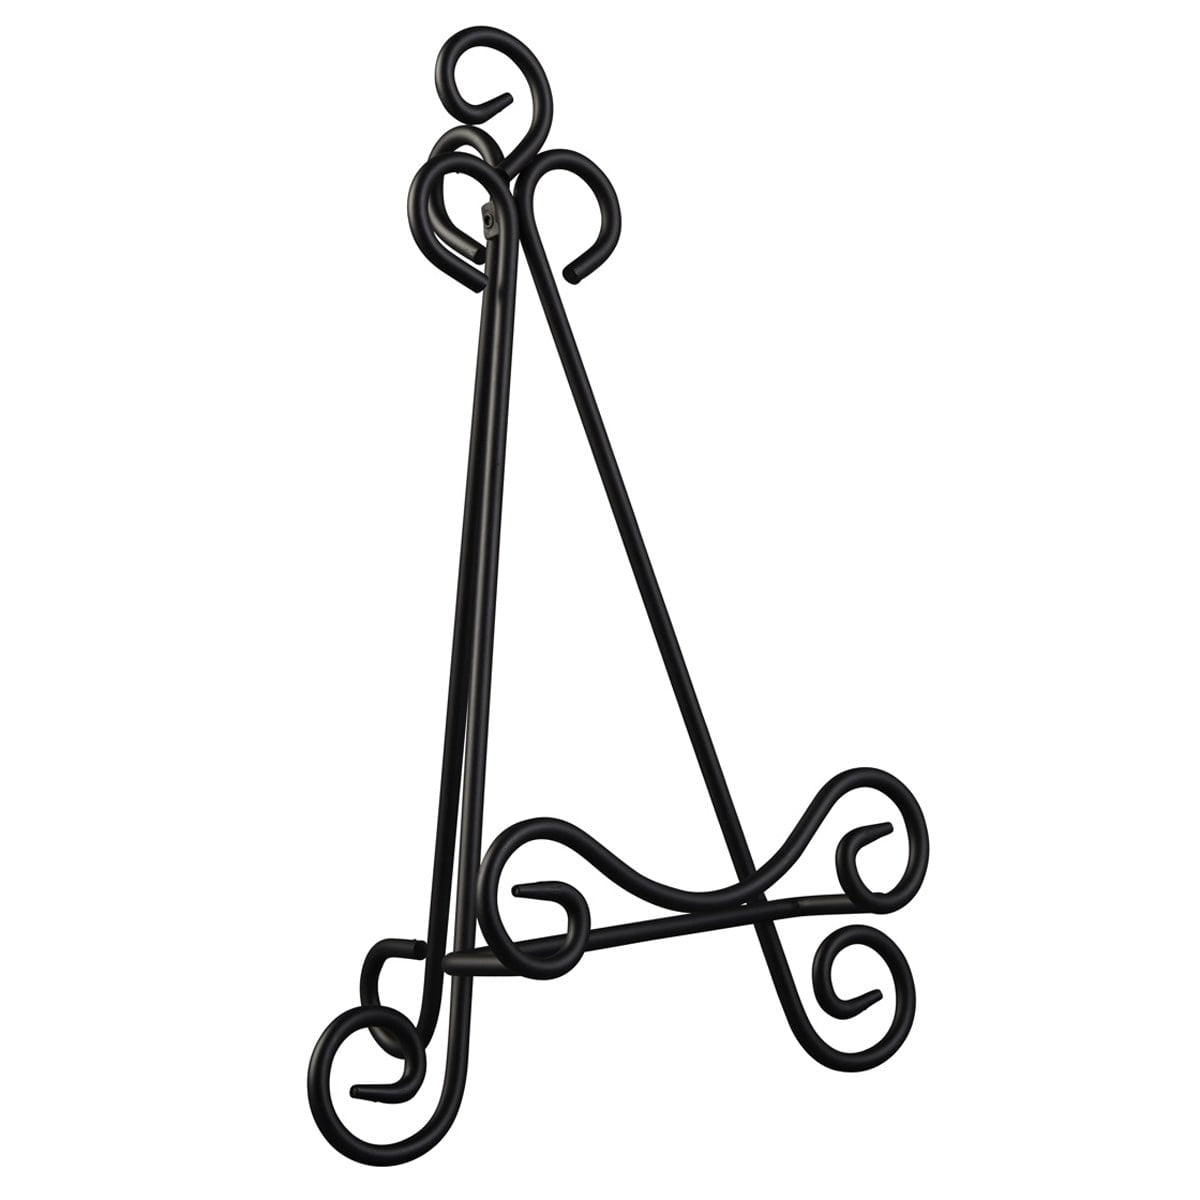  MinWadil Classic Black Easel Stand, Metal Plate Stand